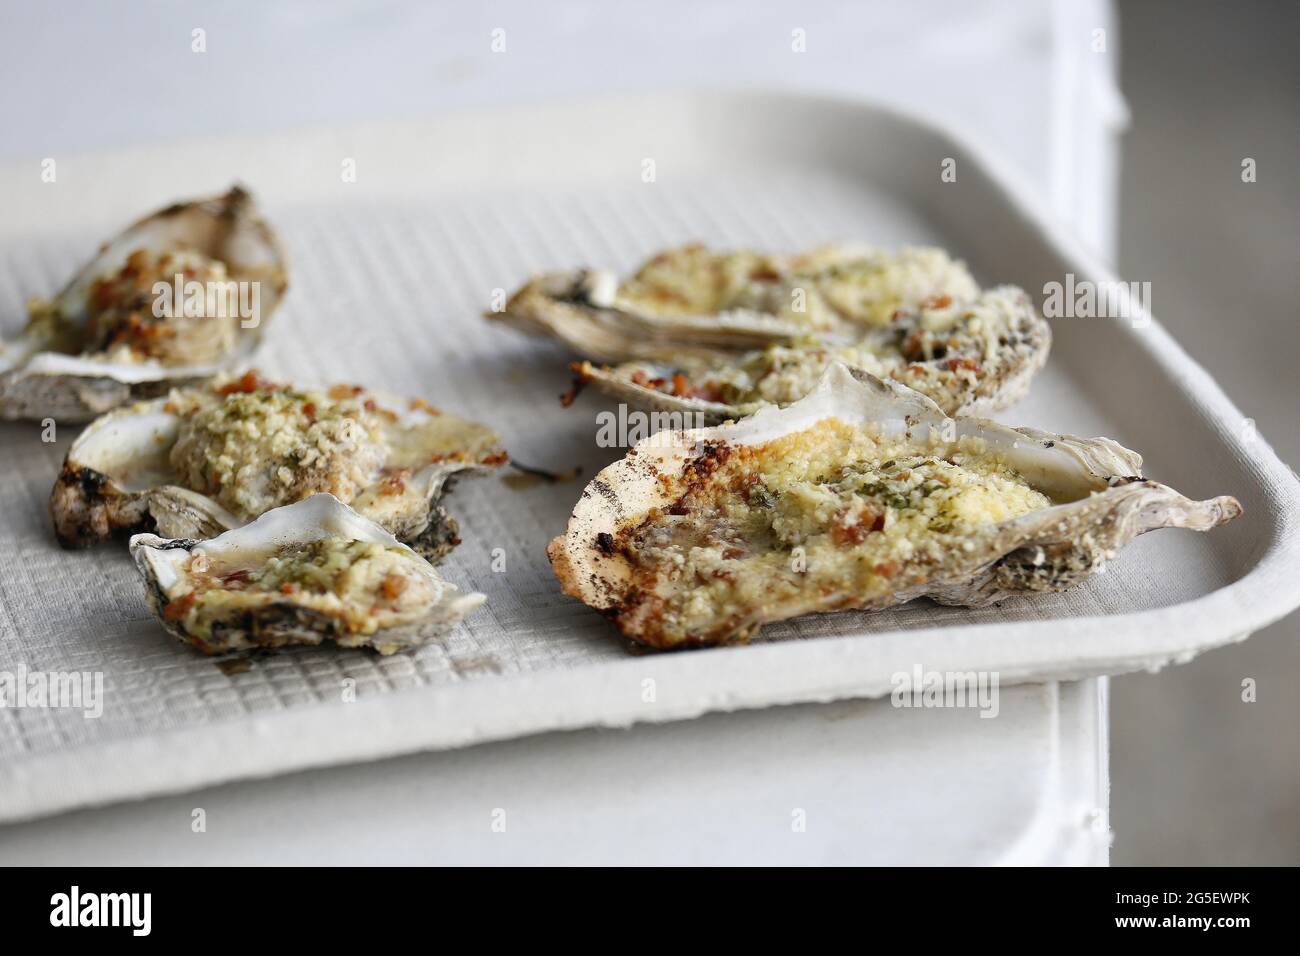 Fresh From Nancy's Garden: BBQ'd Louisiana Style Oysters In A